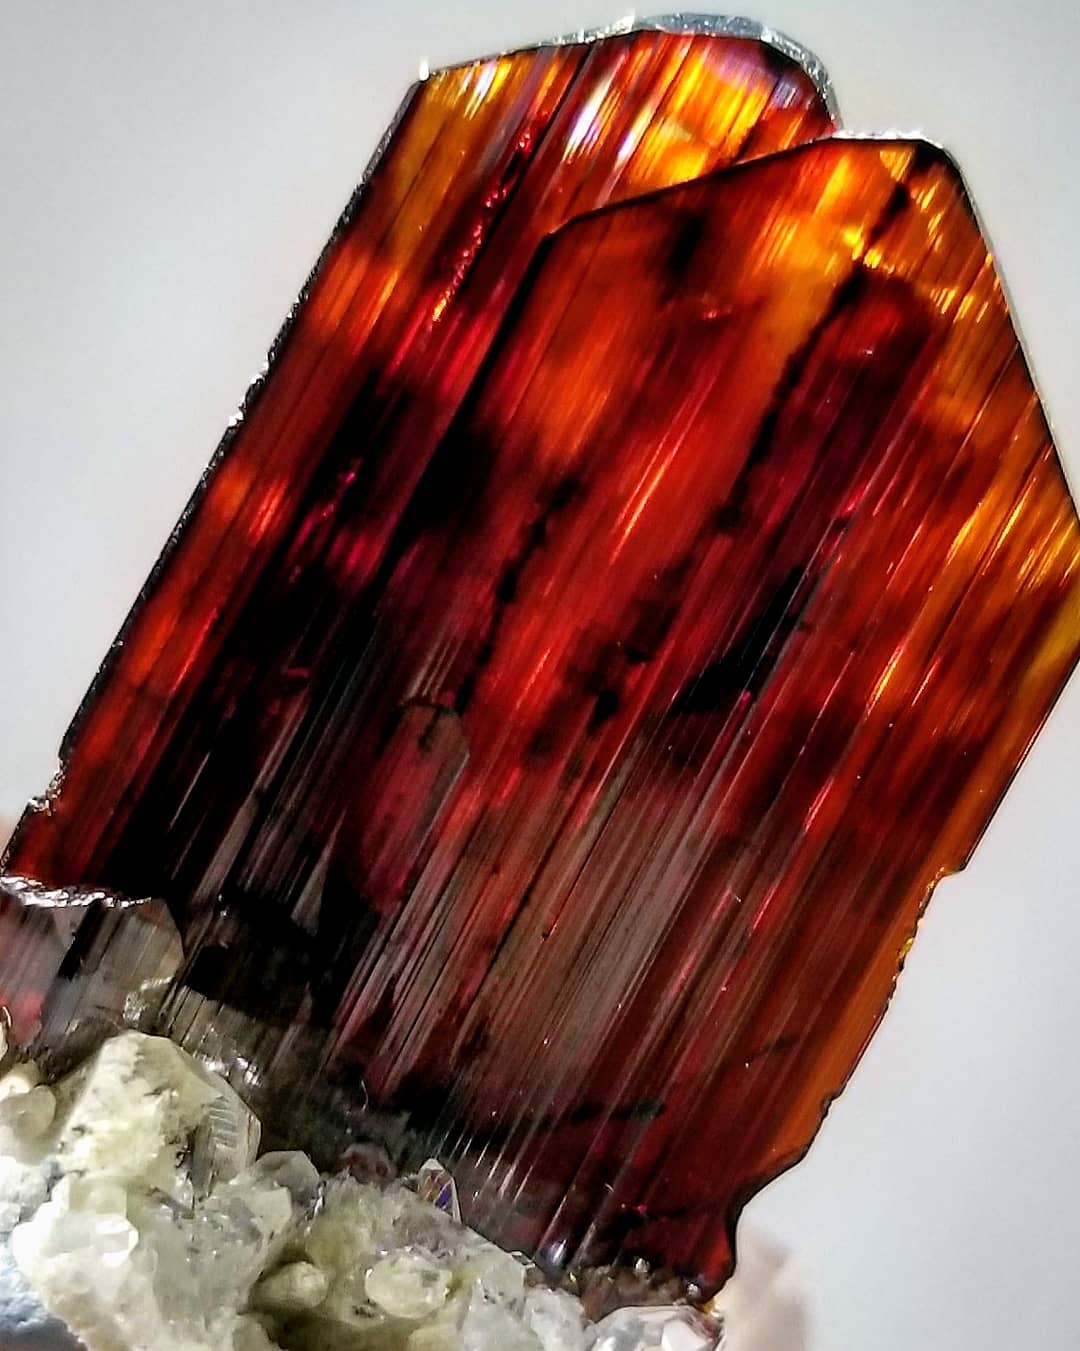 Vivid Red Fine Brookite Crystal Perched Nicely on Gemmy Quartz